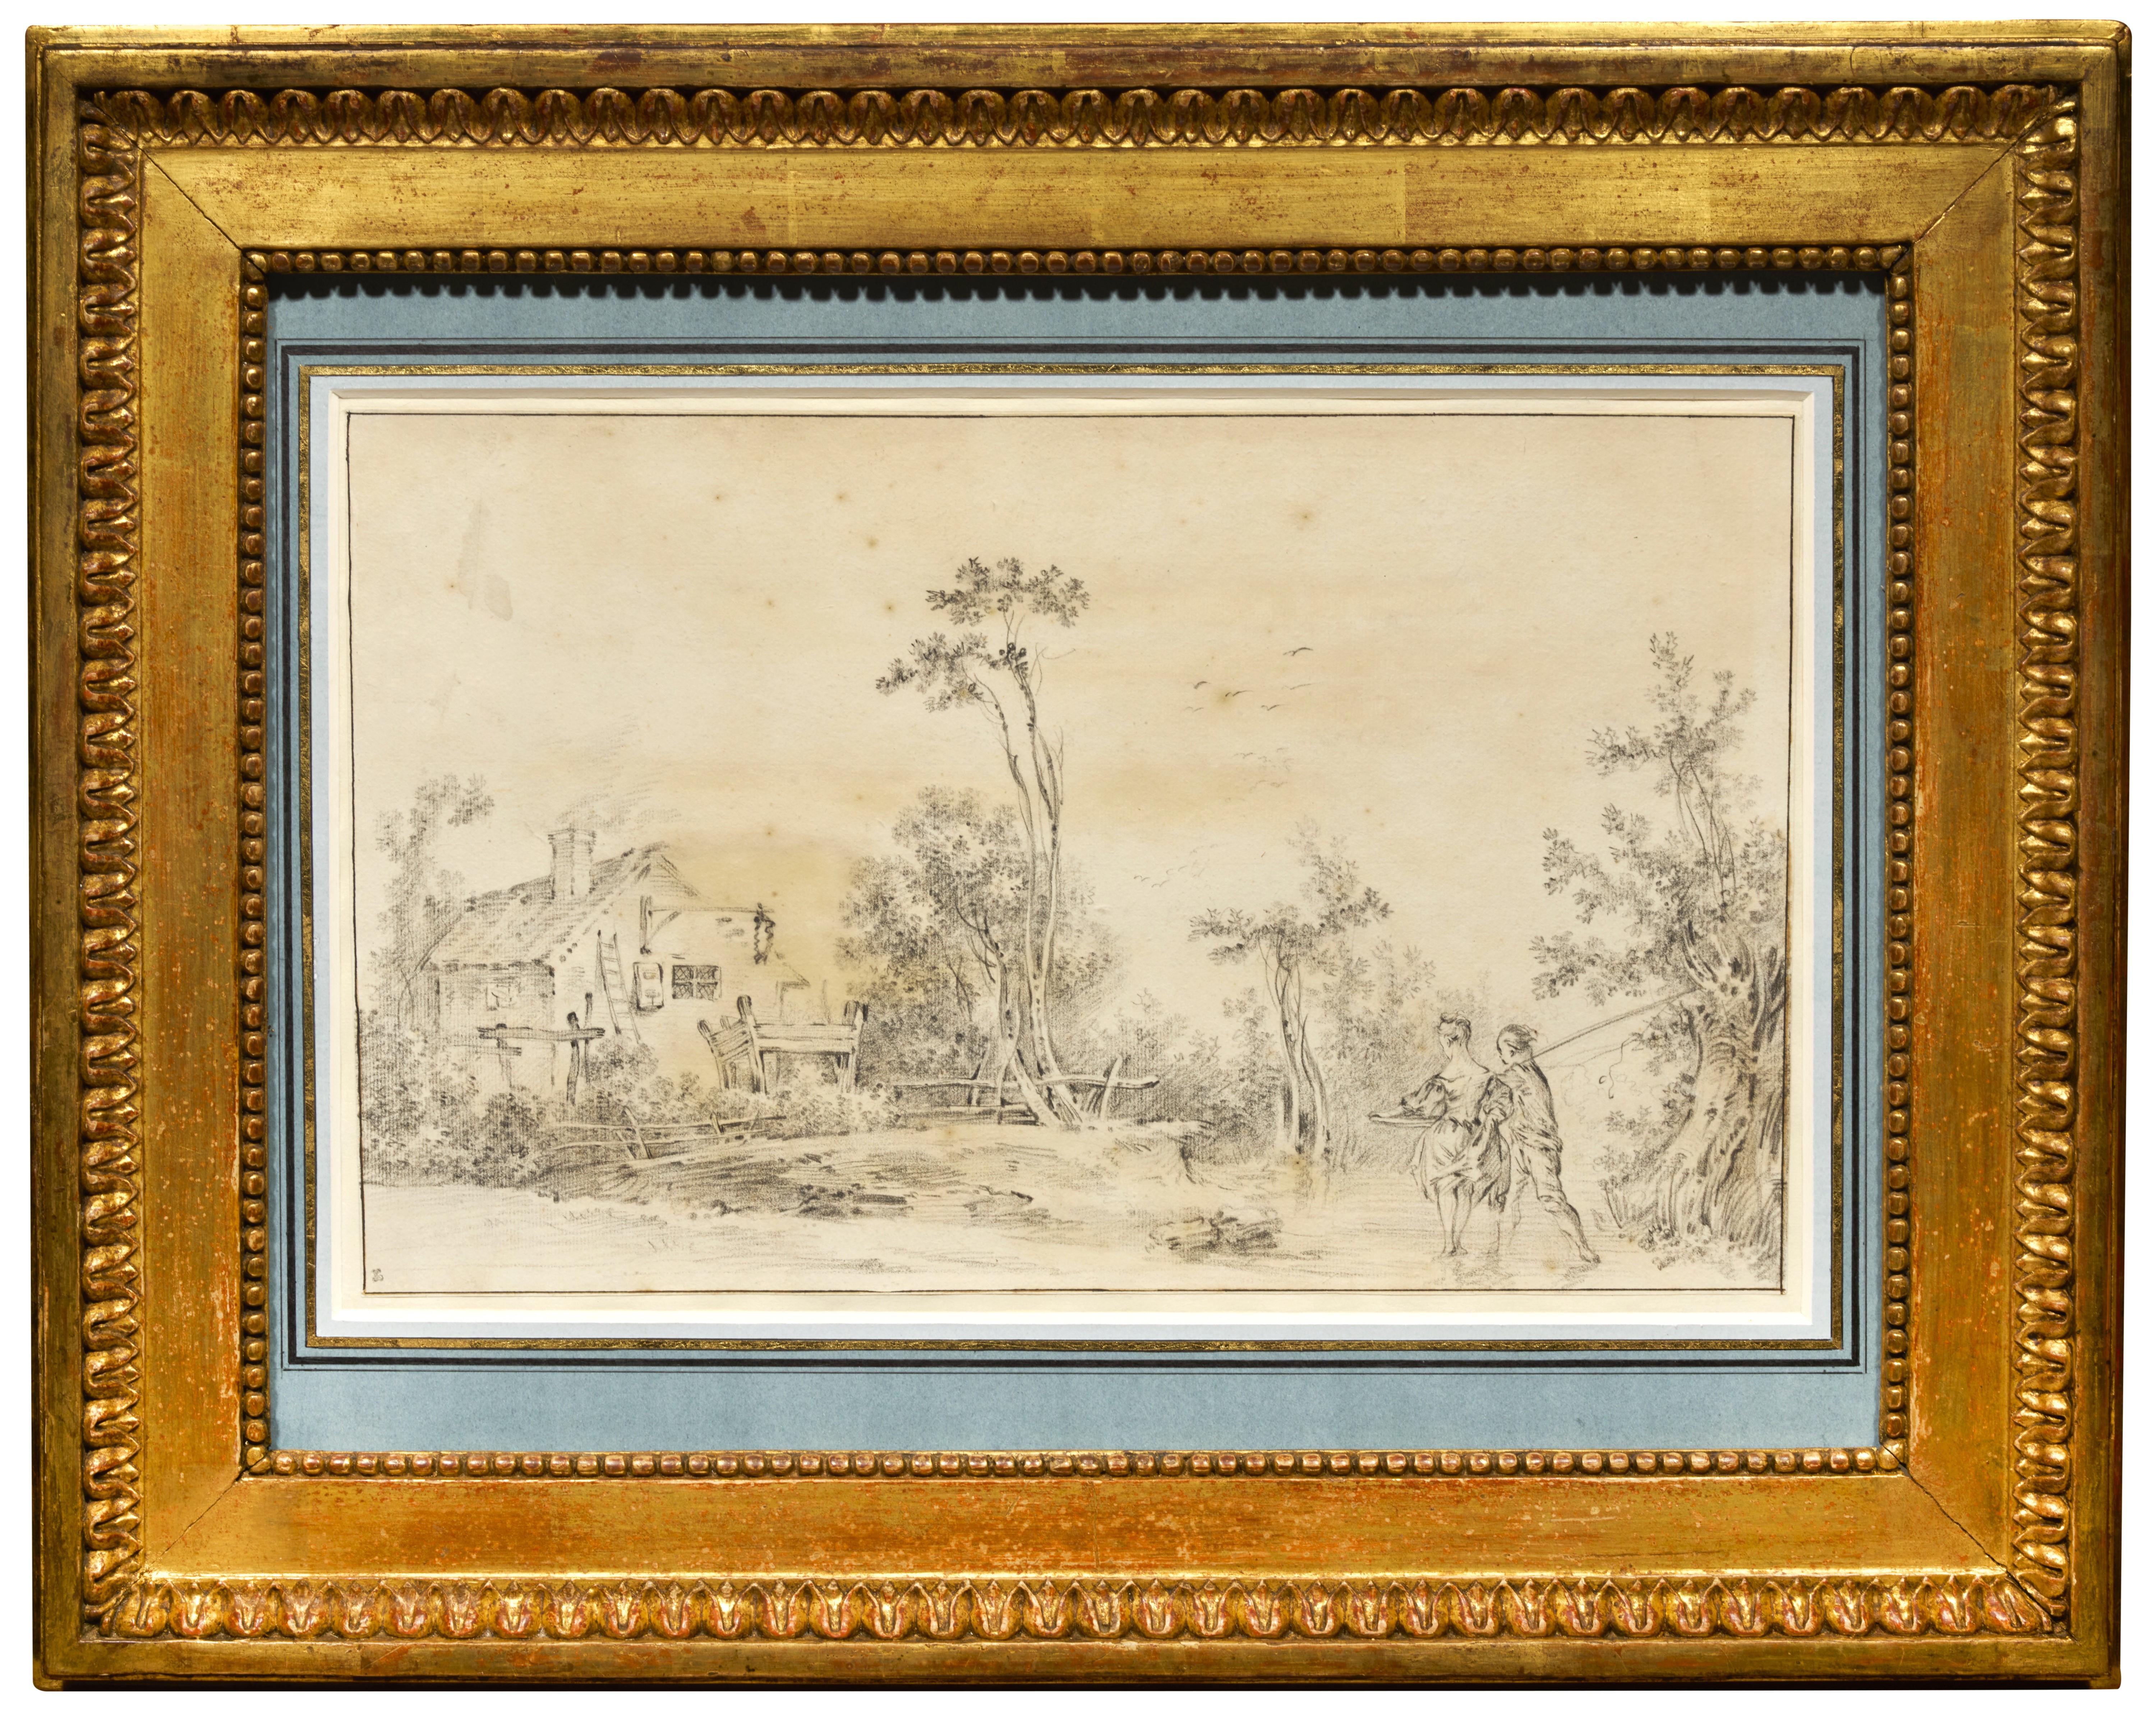 A rural landscape, a drawing partly attributed to Francois Boucher - Painting by François Boucher